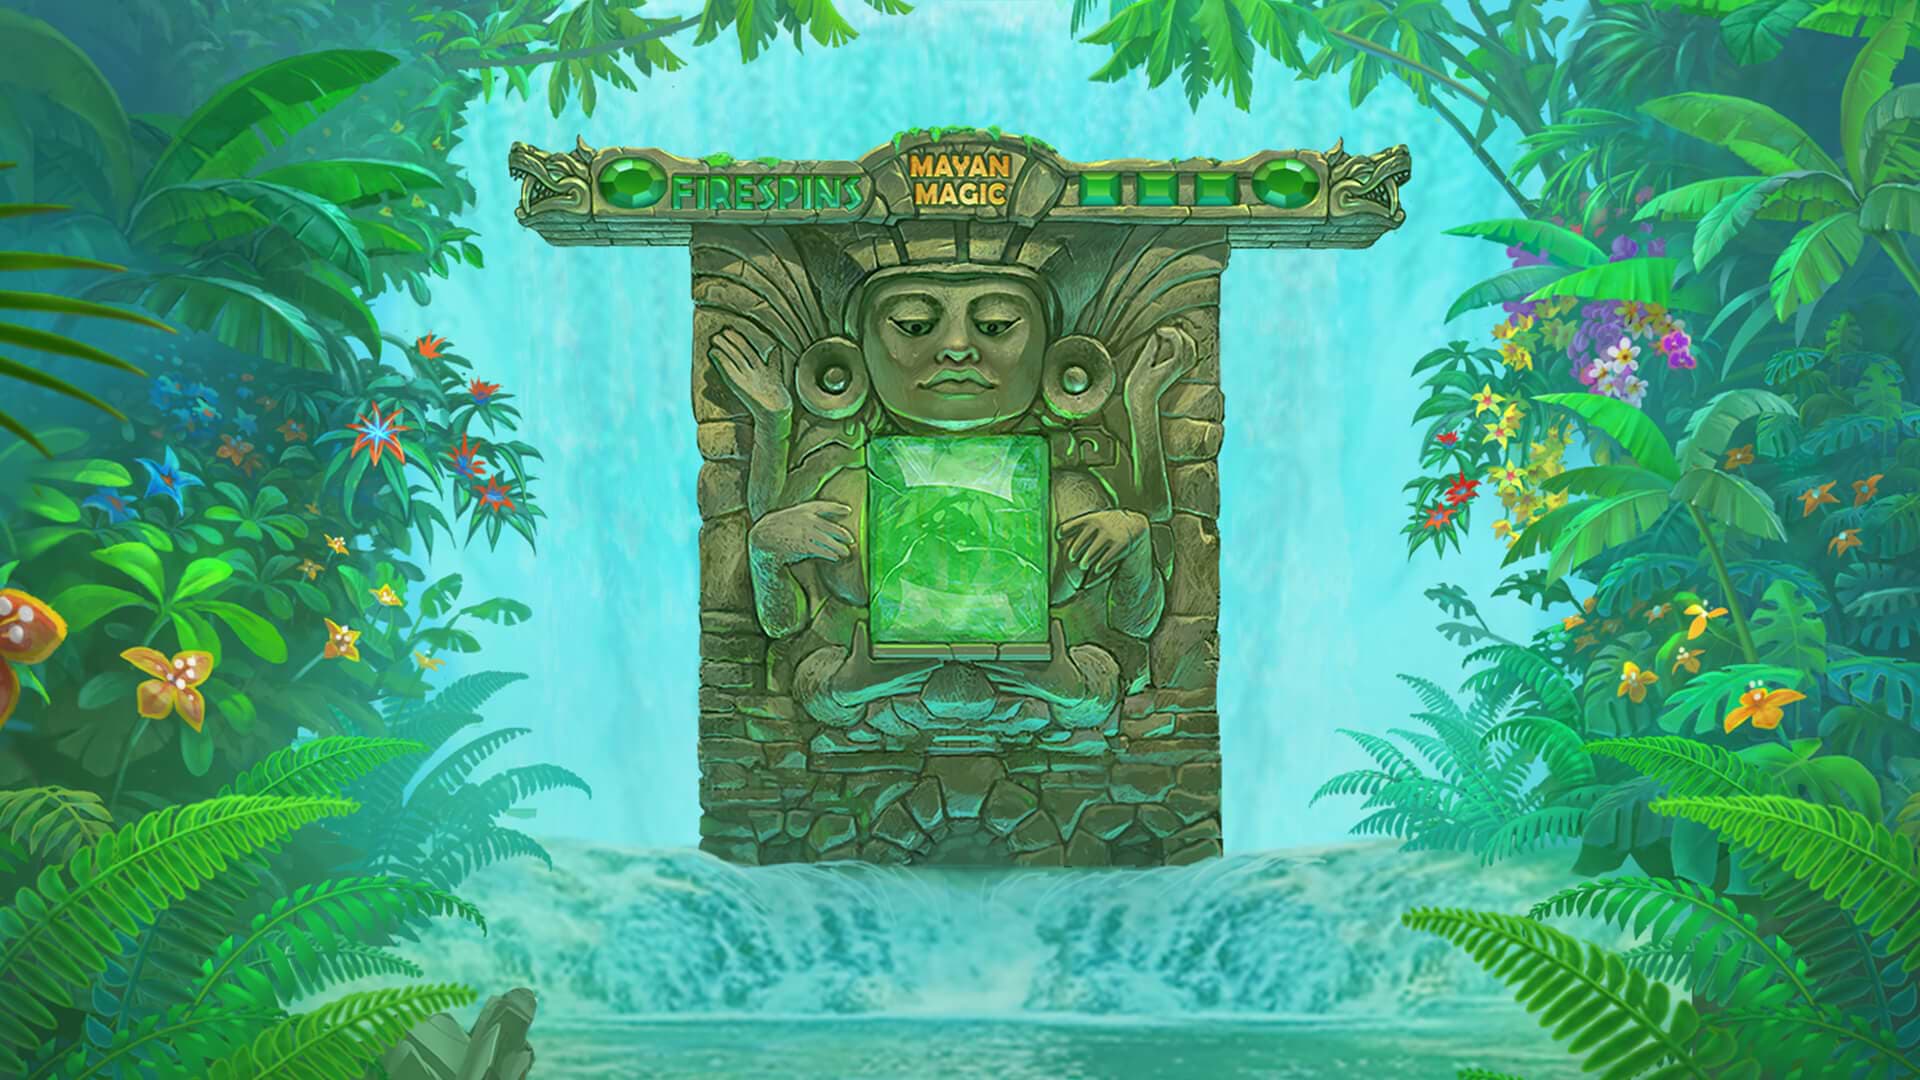 Game hight resolution background Mayan Magic Wildfire